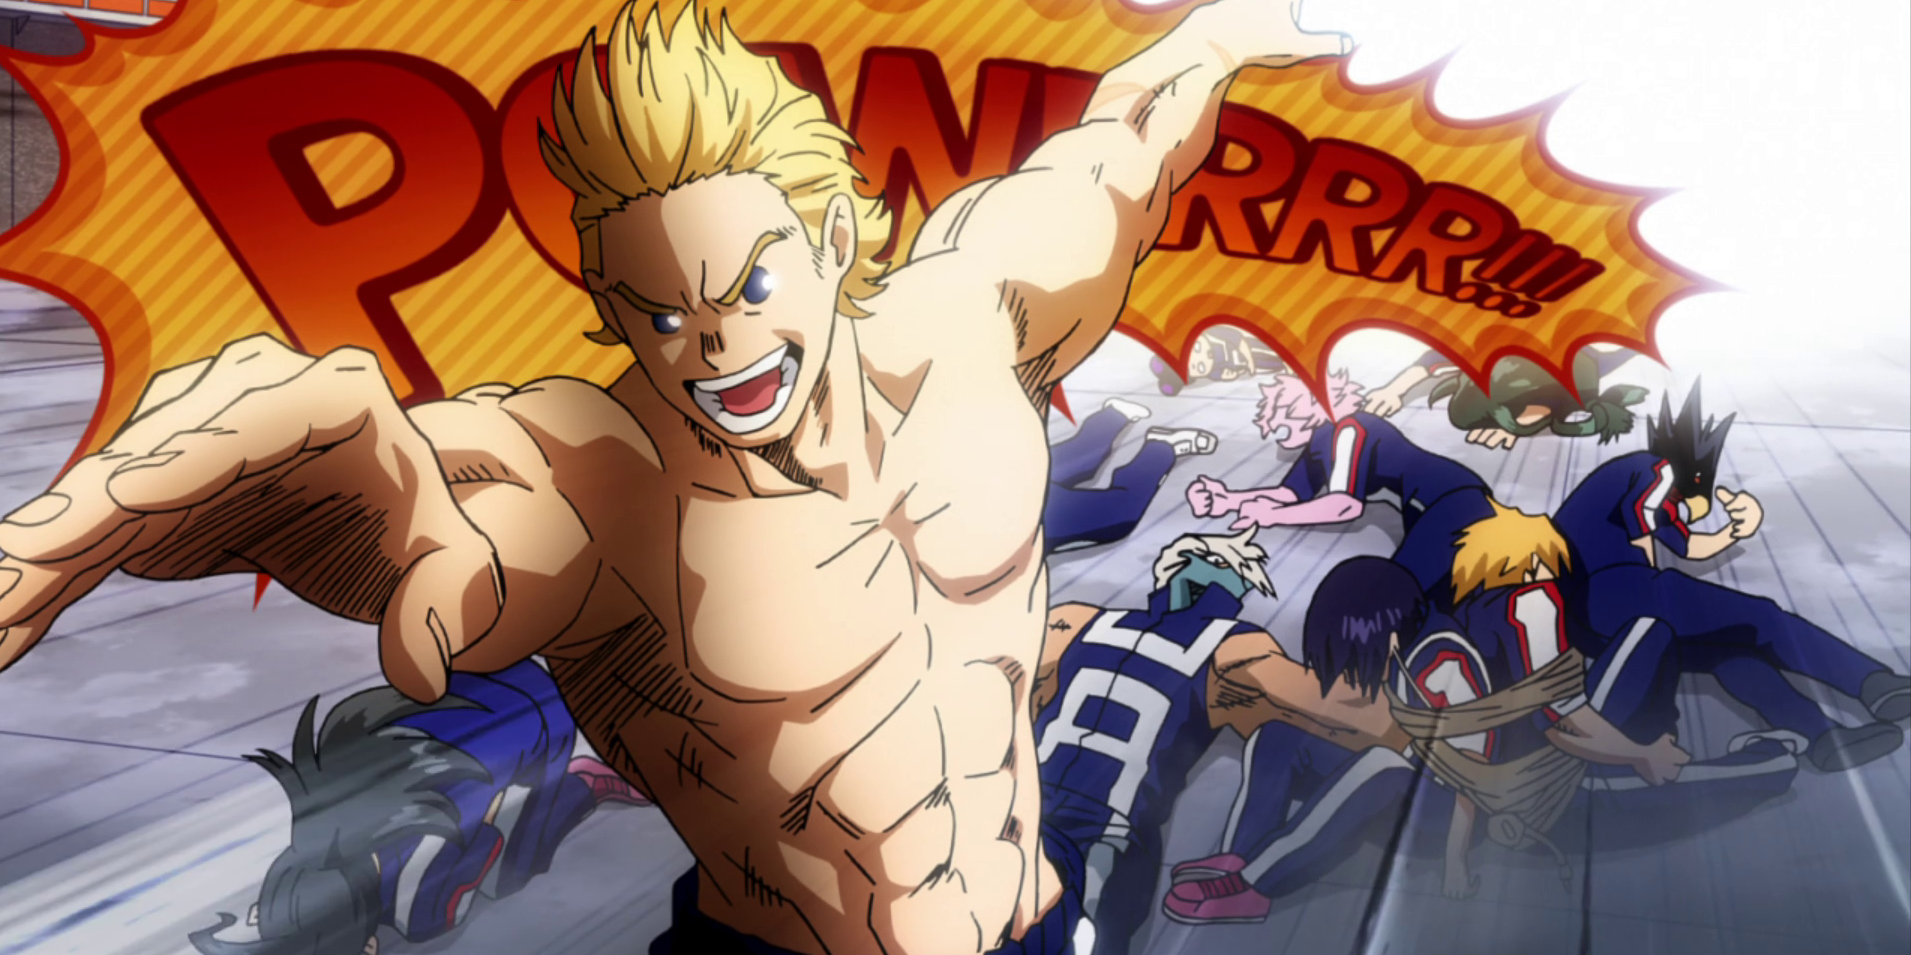 Mirio after knocking out Class 1-A in My Hero Academia.